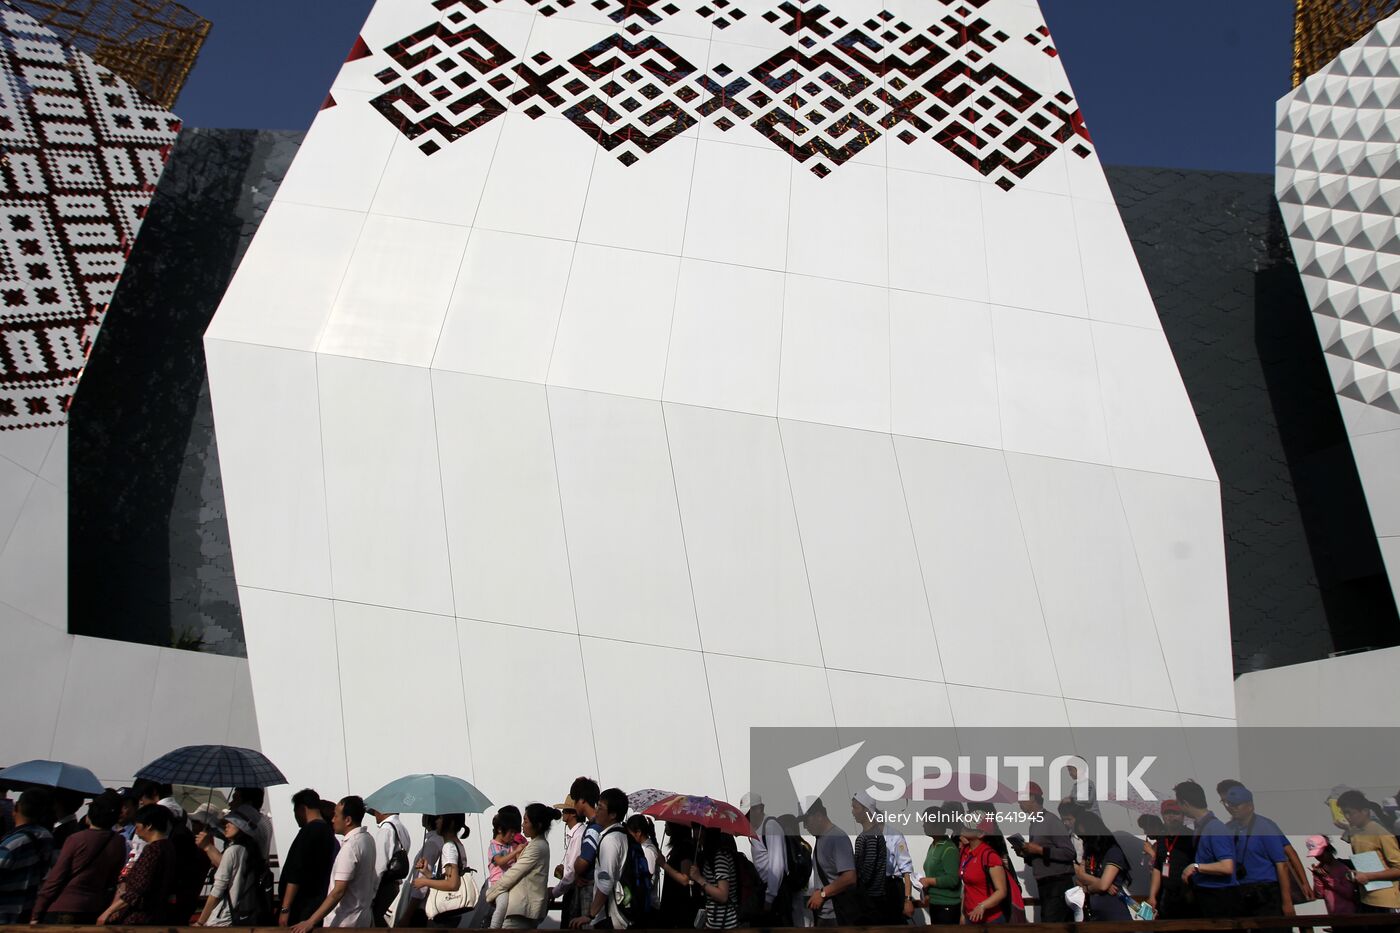 Visitors line up to view Russia Pavilion at World Expo 2010